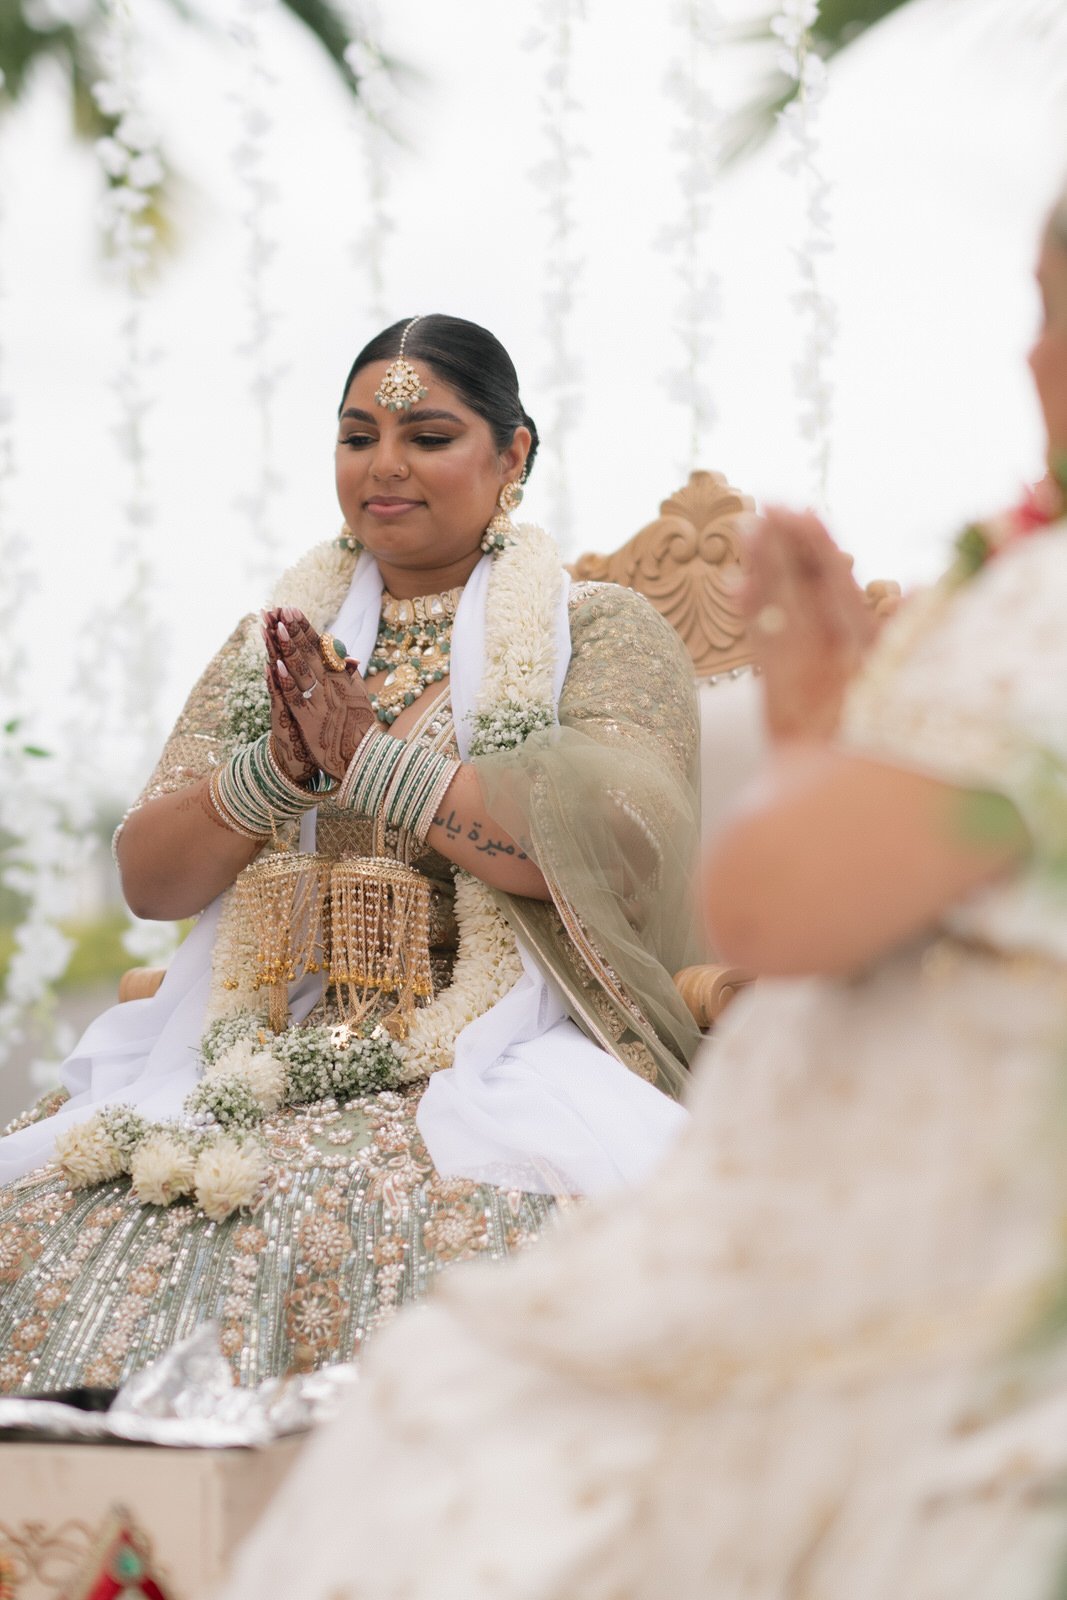 Luxury Indian Wedding in Miami Florida - Indian wedding photographer miami florida - michelle gonzalez photography - loews hotel in coral gables wedding-68.jpg